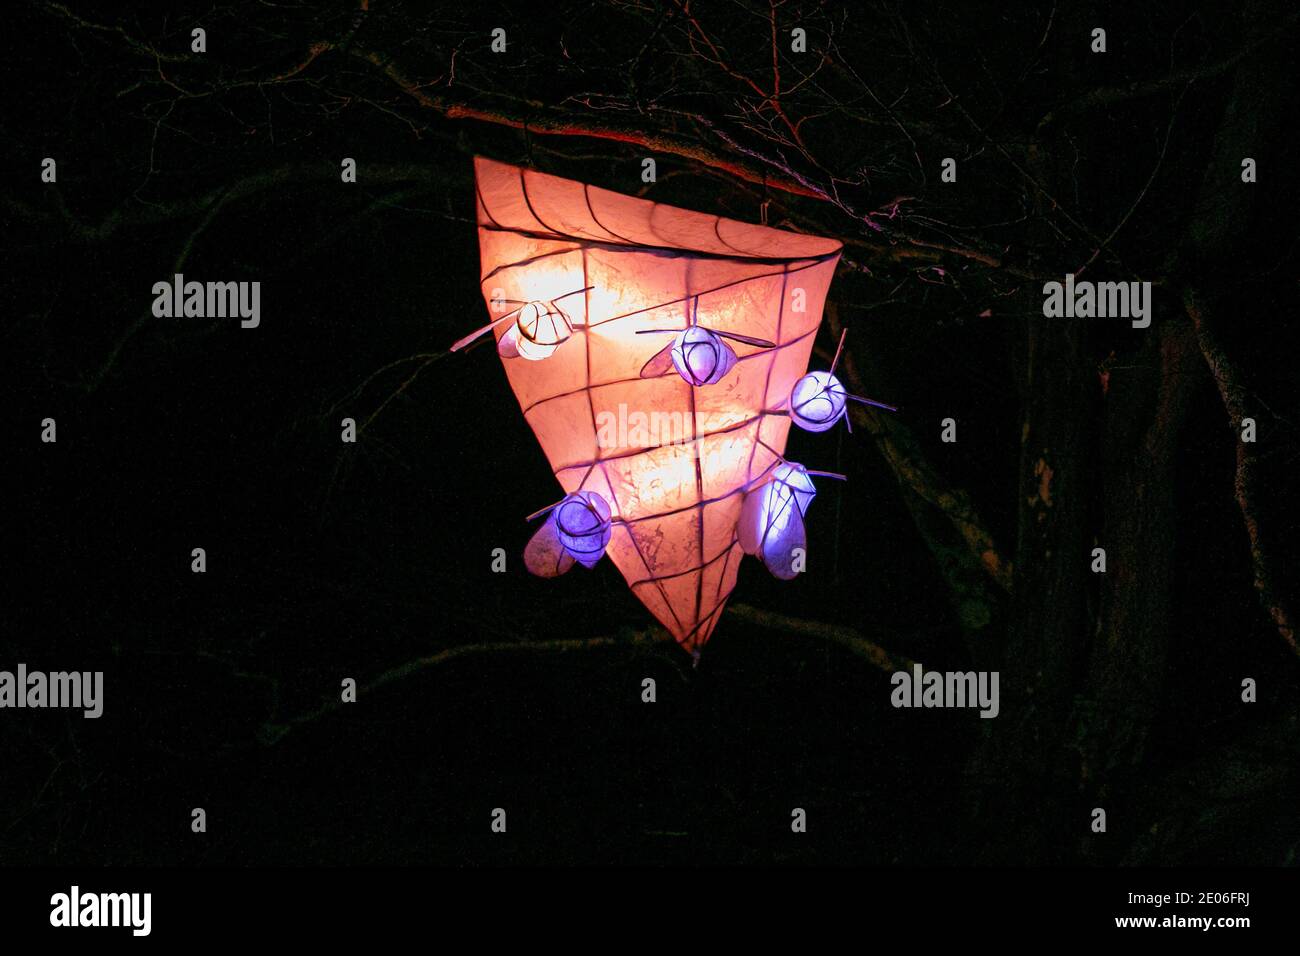 December 29, 2020: Haywards Heath, UK. 29 December 2020. Christmas light trail 'Glow Wild 2020'' livens up this year's festivities at Wakehurst Place Botanic Gardens, in West Sussex. In the evening the trail lights up and brings to life Wakehurst botanic gardens and its 16th century mansion with its enchanting atmosphere created by glowing lanterns, torches of fire, and enthralling projections. Now in its seventh year, 'Glow Wild'' has gone ahead this year despite the pandemic, by maintaining rigorous safety protocols in line with the latest government guidance on illuminated trails. A n Stock Photo